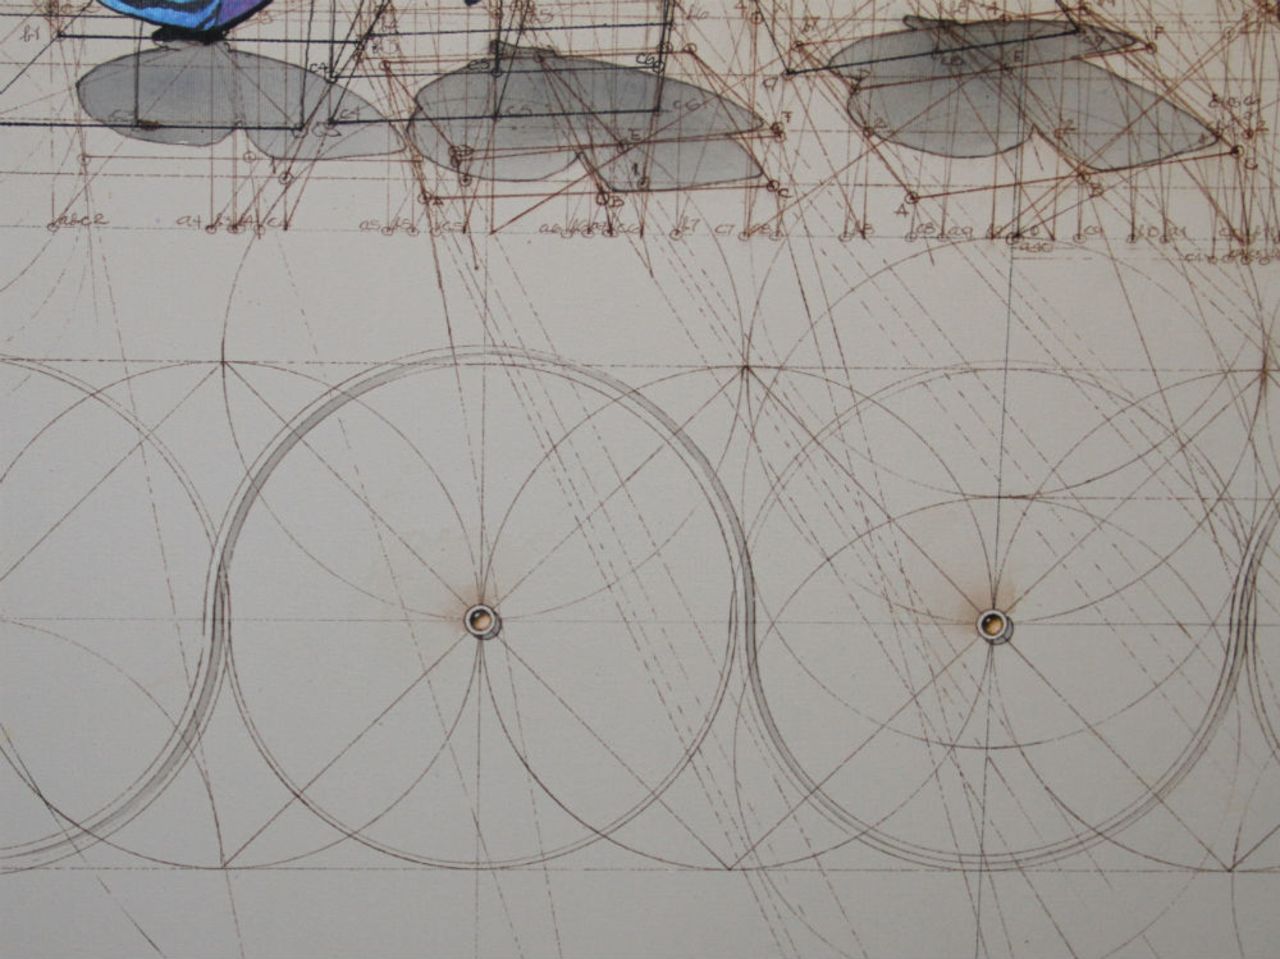 Araujo says that when he was young he loved three-dimensional drawings, and liked to find out ways to locate dots in the space. 